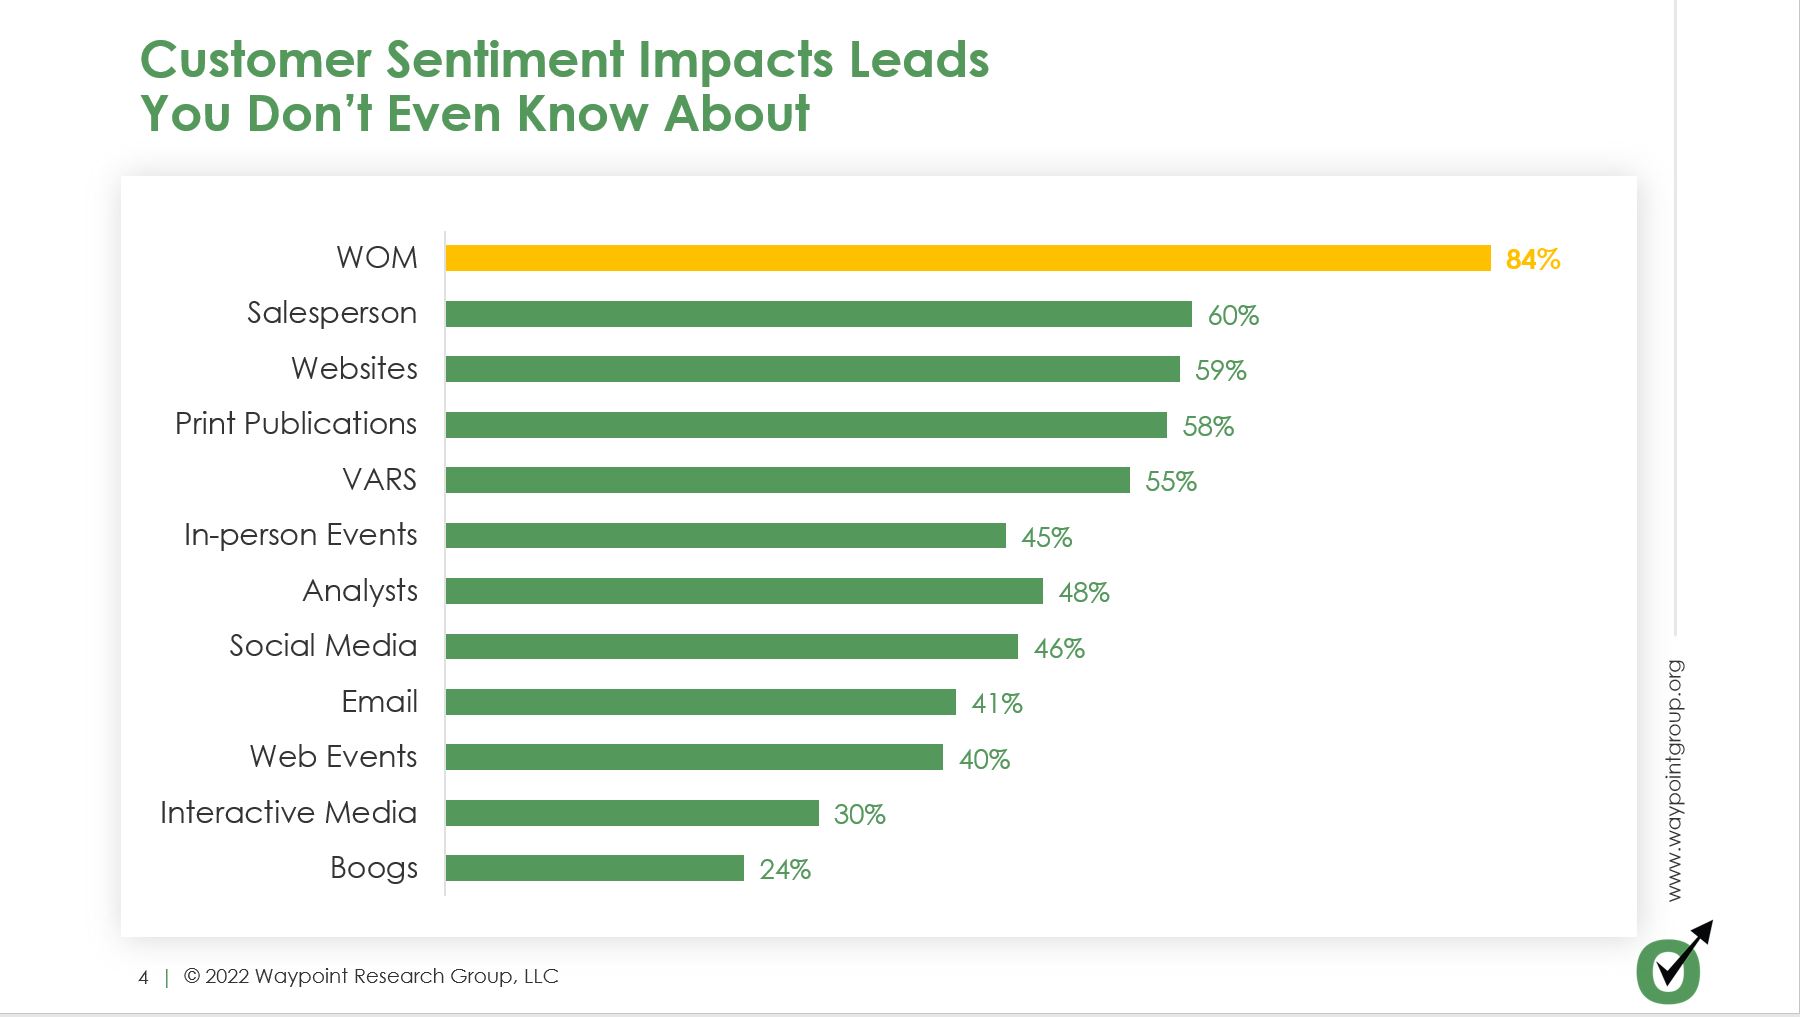 Forrester's Data Shows Us the Power of Word-of-Mouth